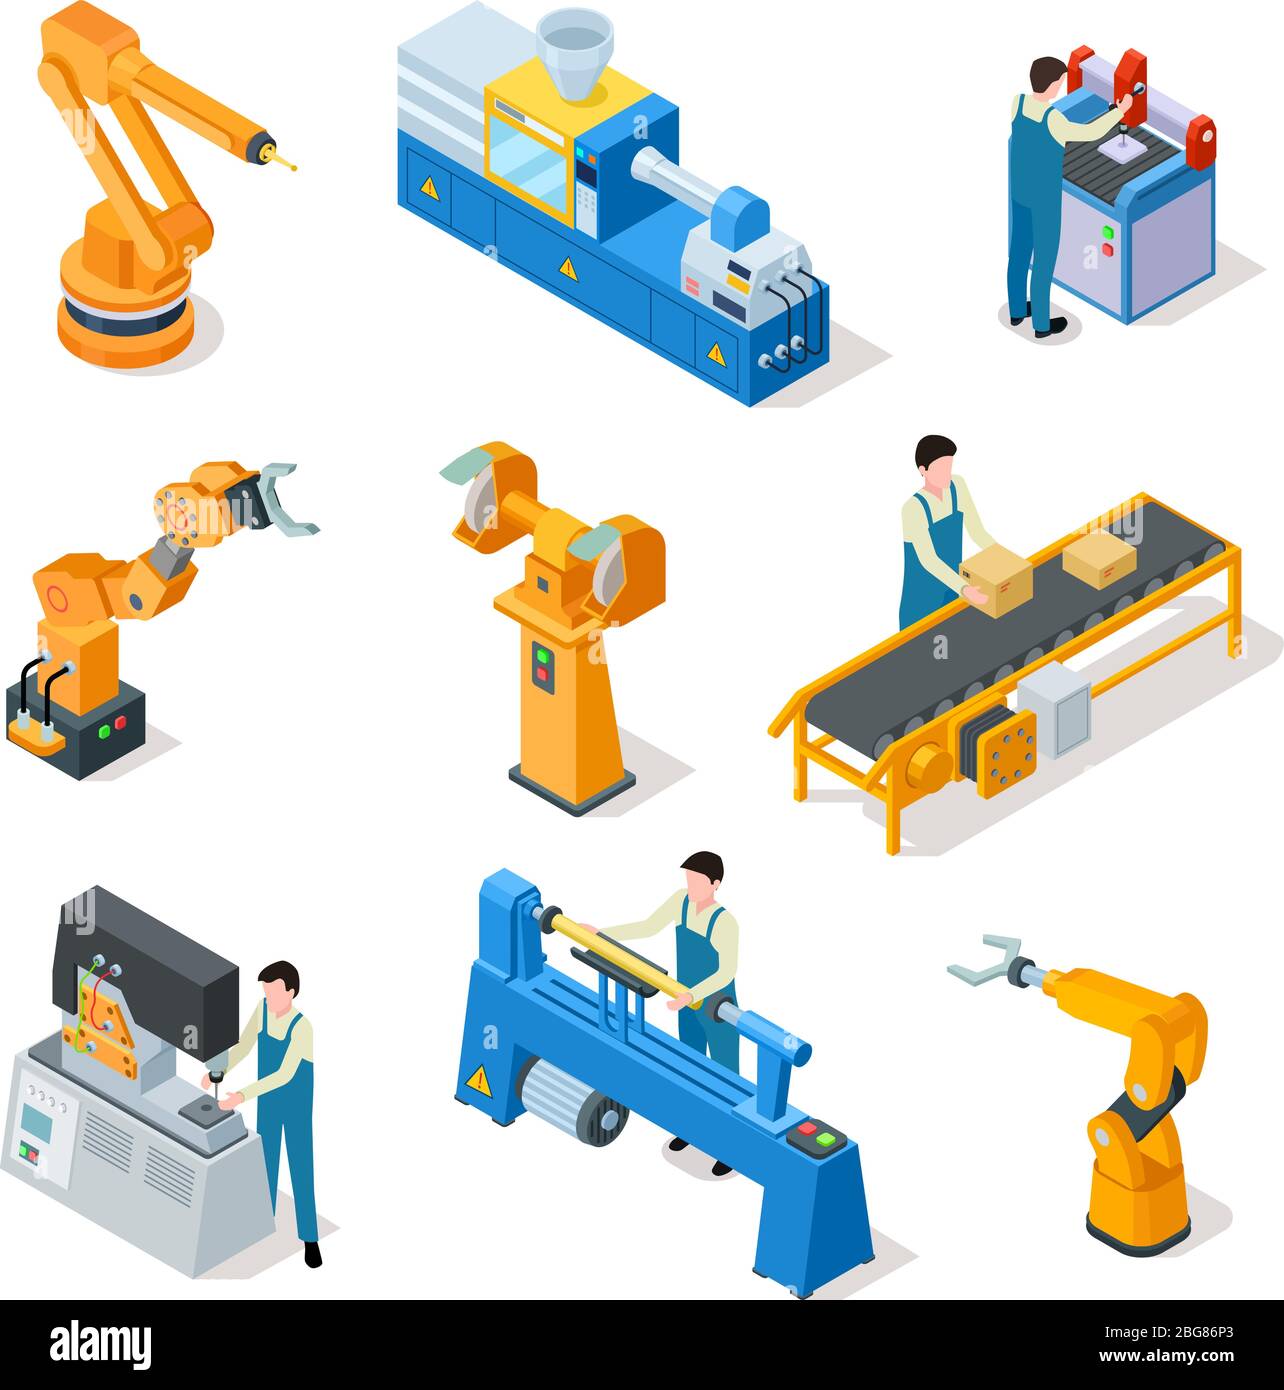 Industrial robots. Isometric machines, assembly line elemets and robotic arms with workers. 3d manufacturing technologies vector set. Robot mechanical automation, machine production illustration Stock Vector